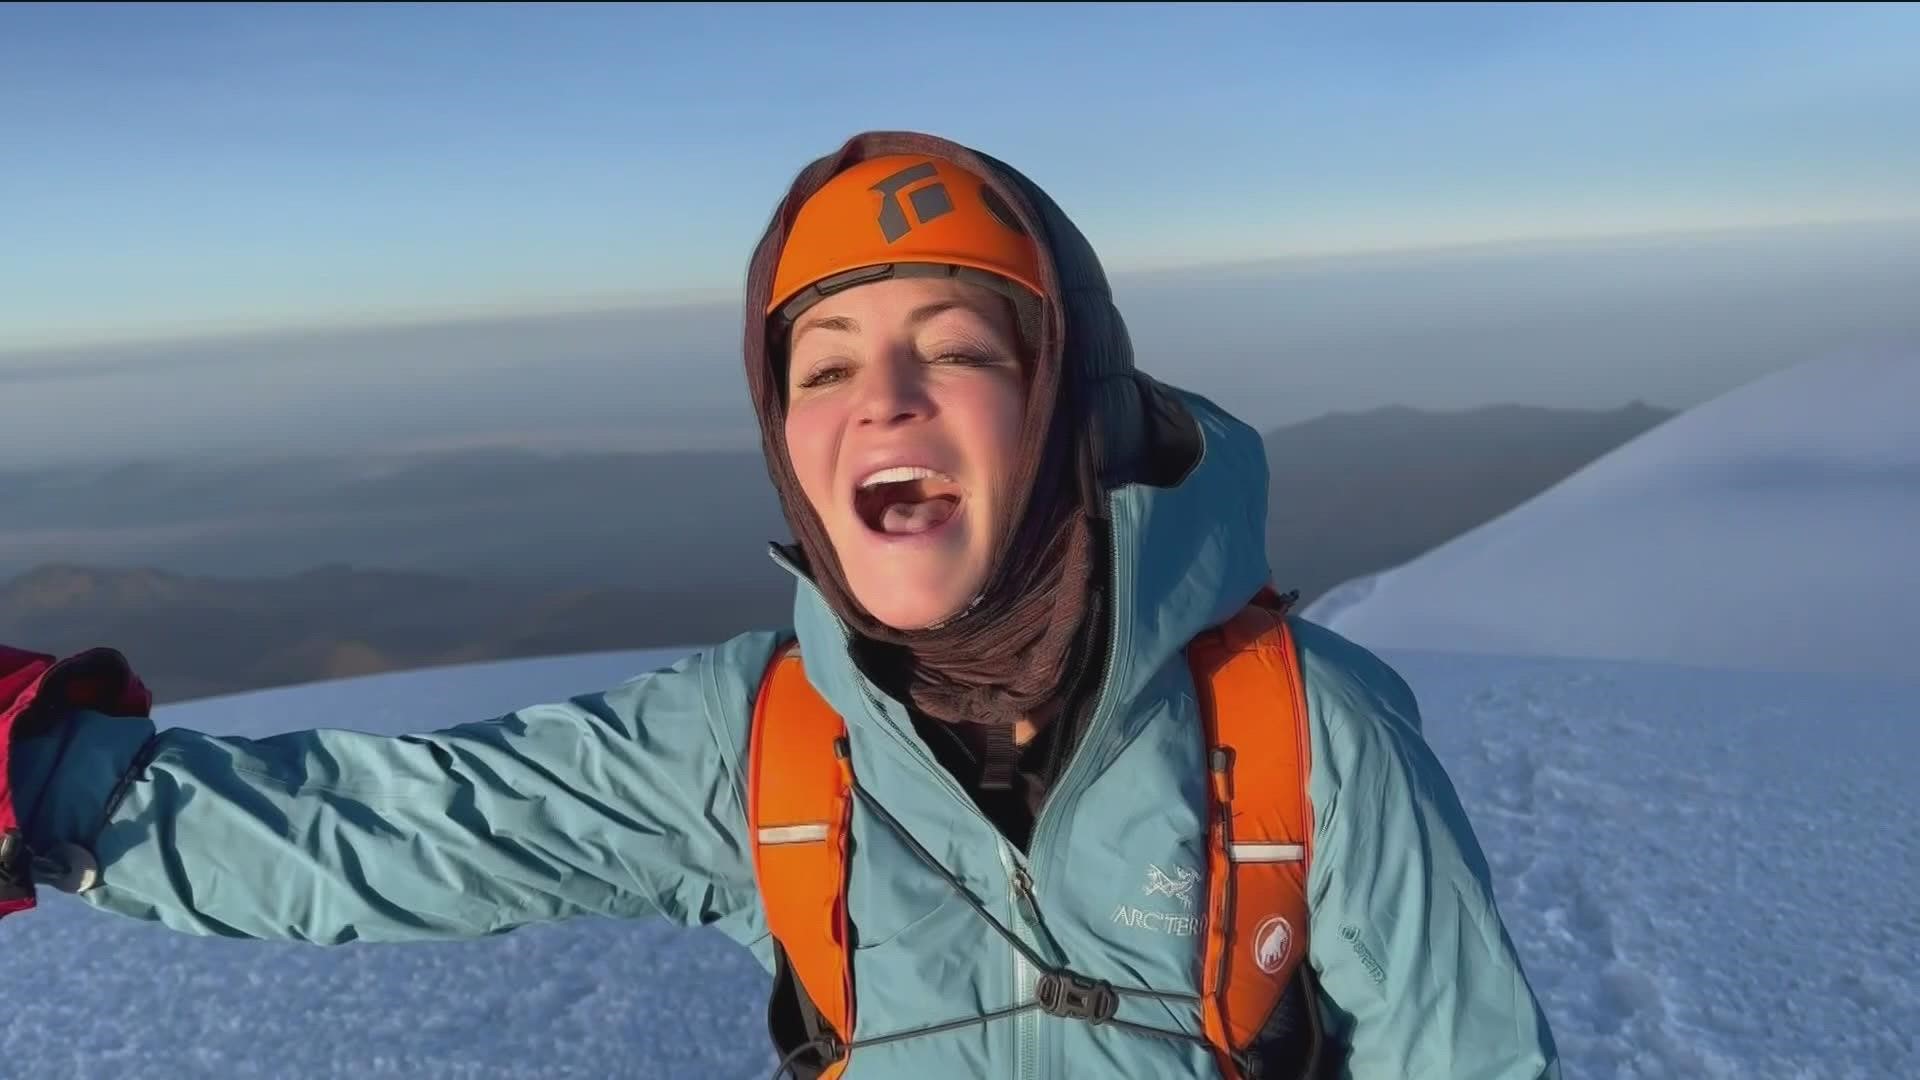 CBS 8 last spoke with climber Valerie Orsoni in September 2022, when she broke a record of climbing 20 peaks in 12 days. Now, she’s back at it again.